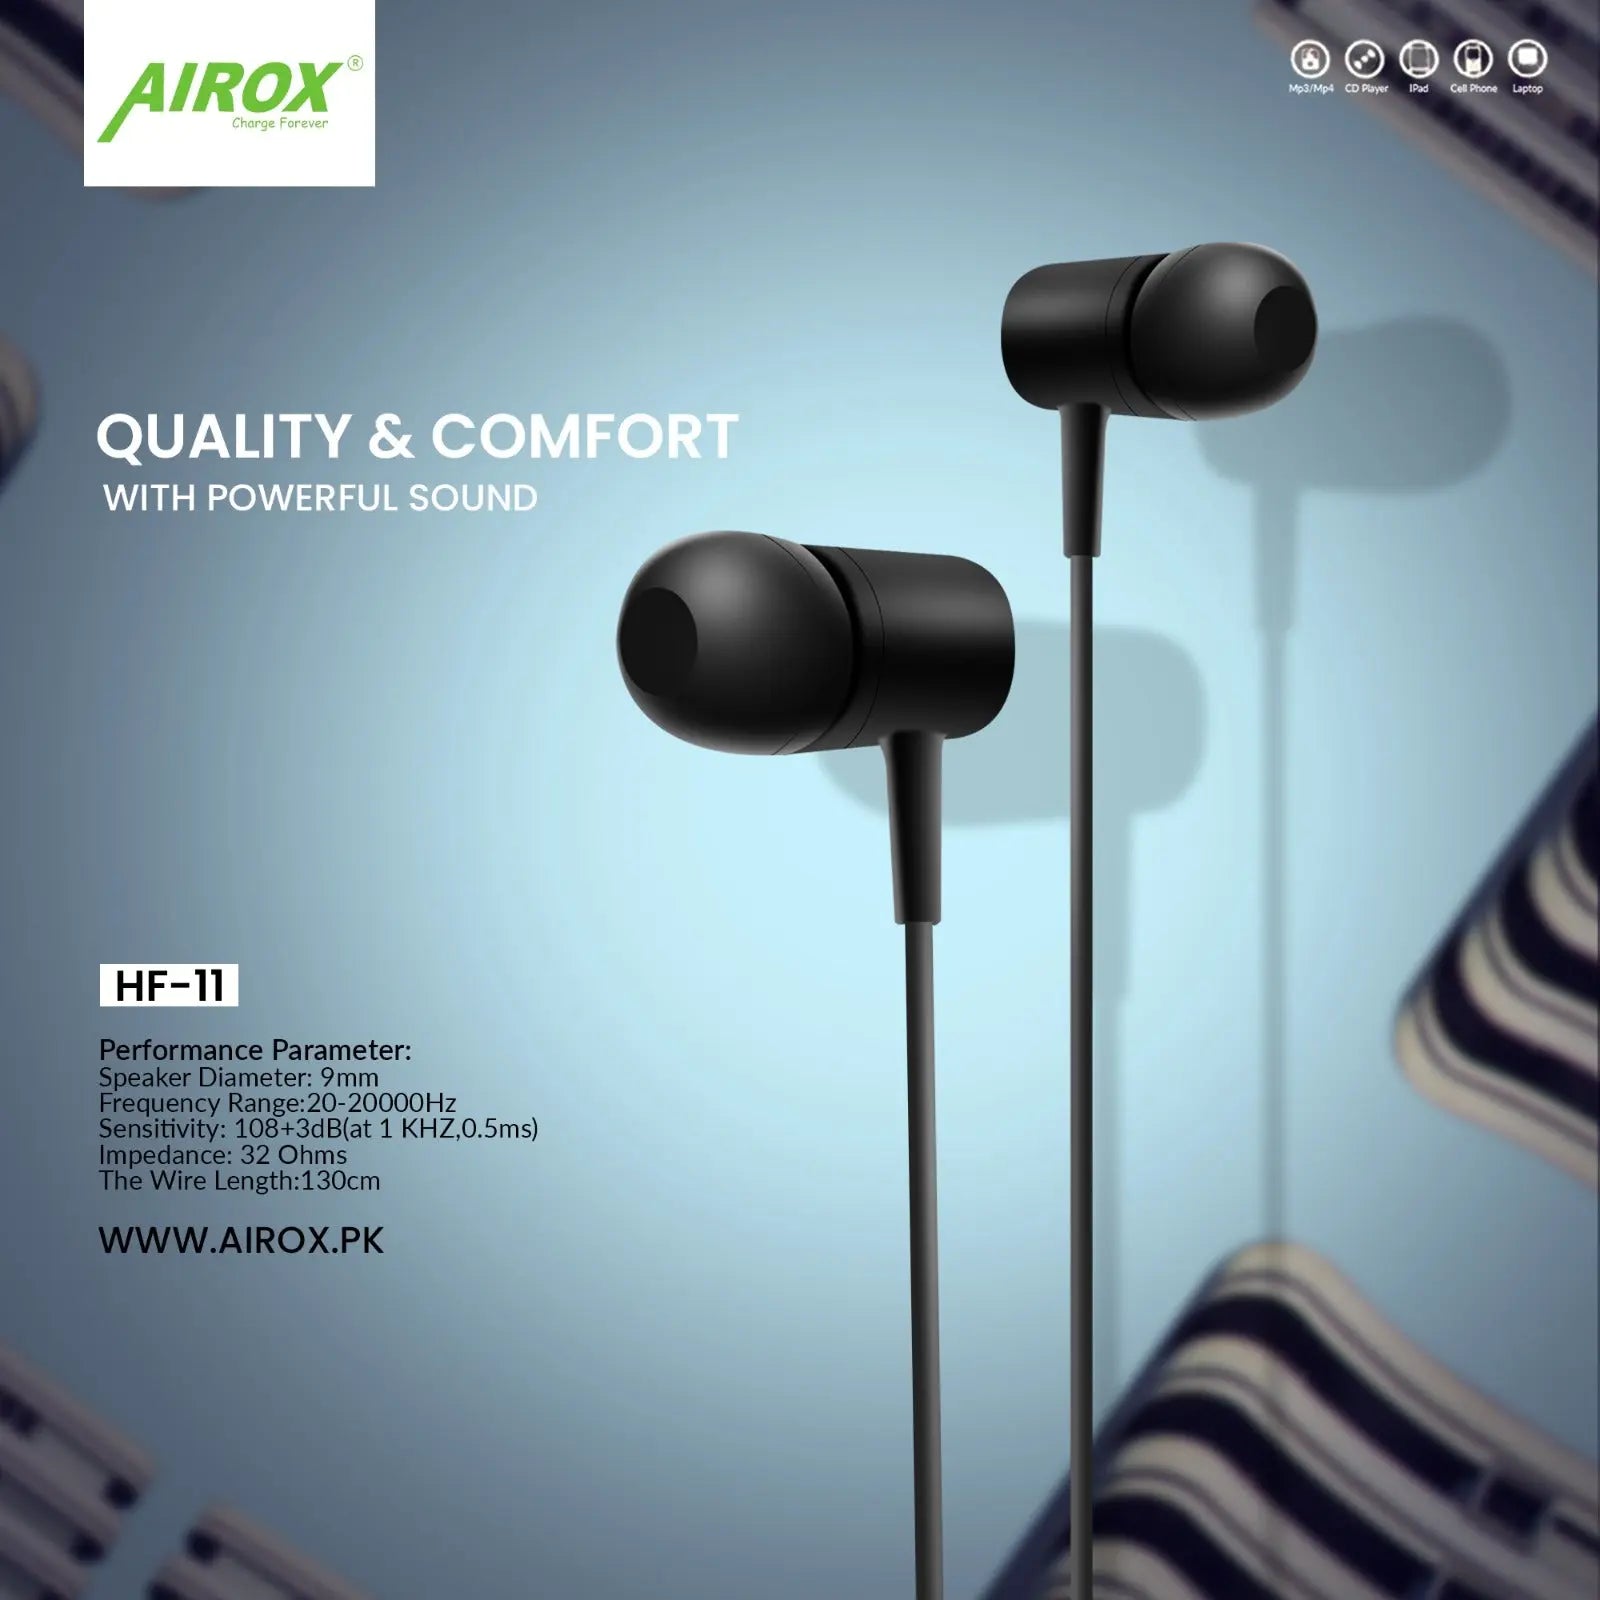 Airox HF-11 Quality Earphone at affordable Price Airox.pk